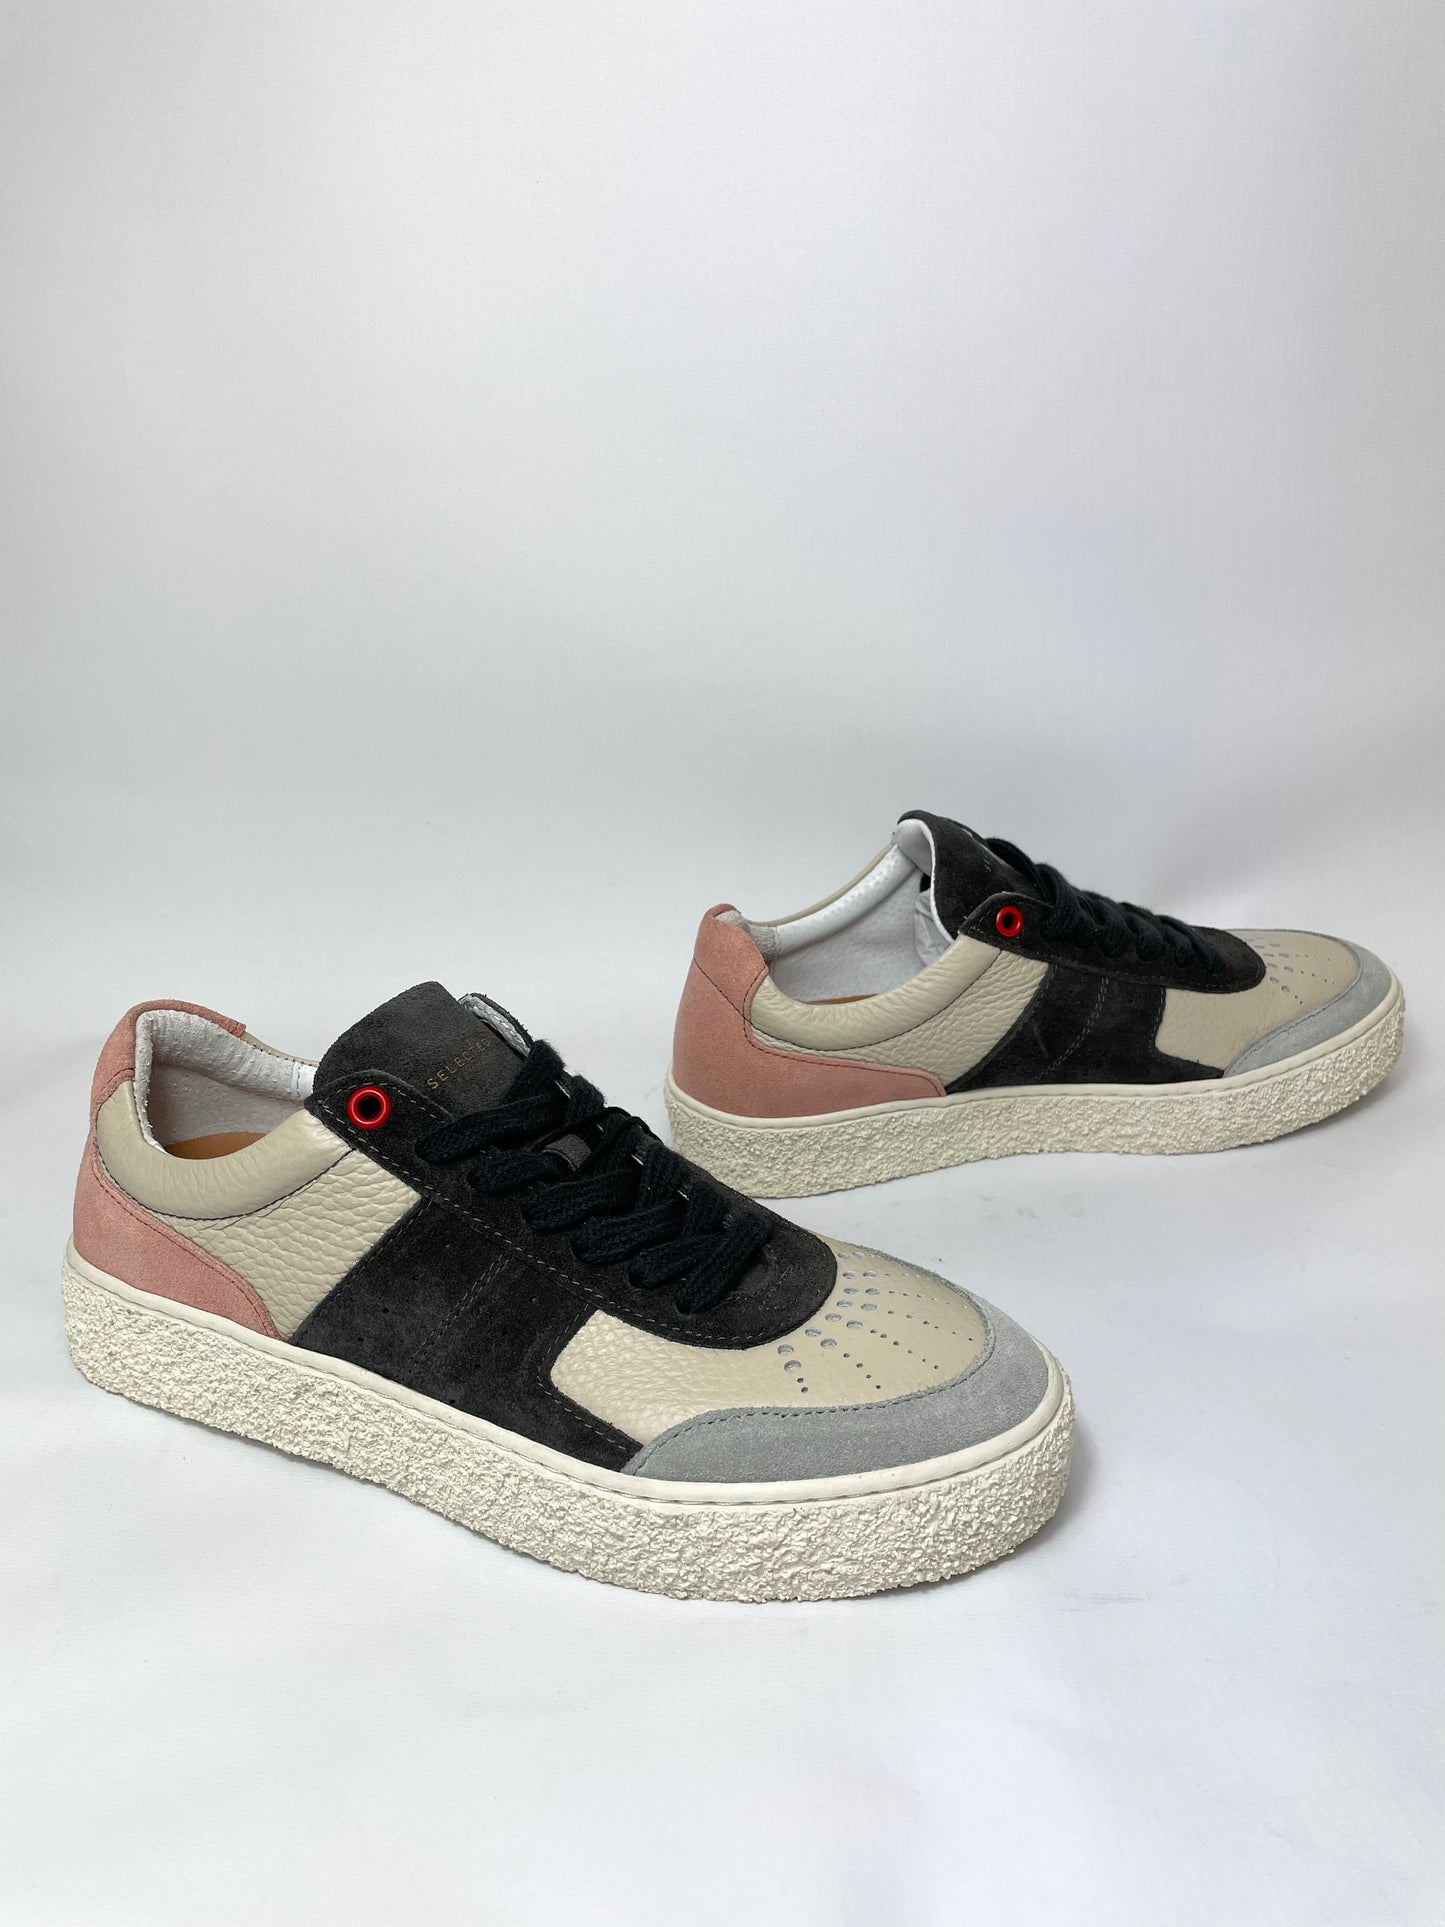 Selected Femme Anthropology Dina Leather Suede Ladies Platform Trainers